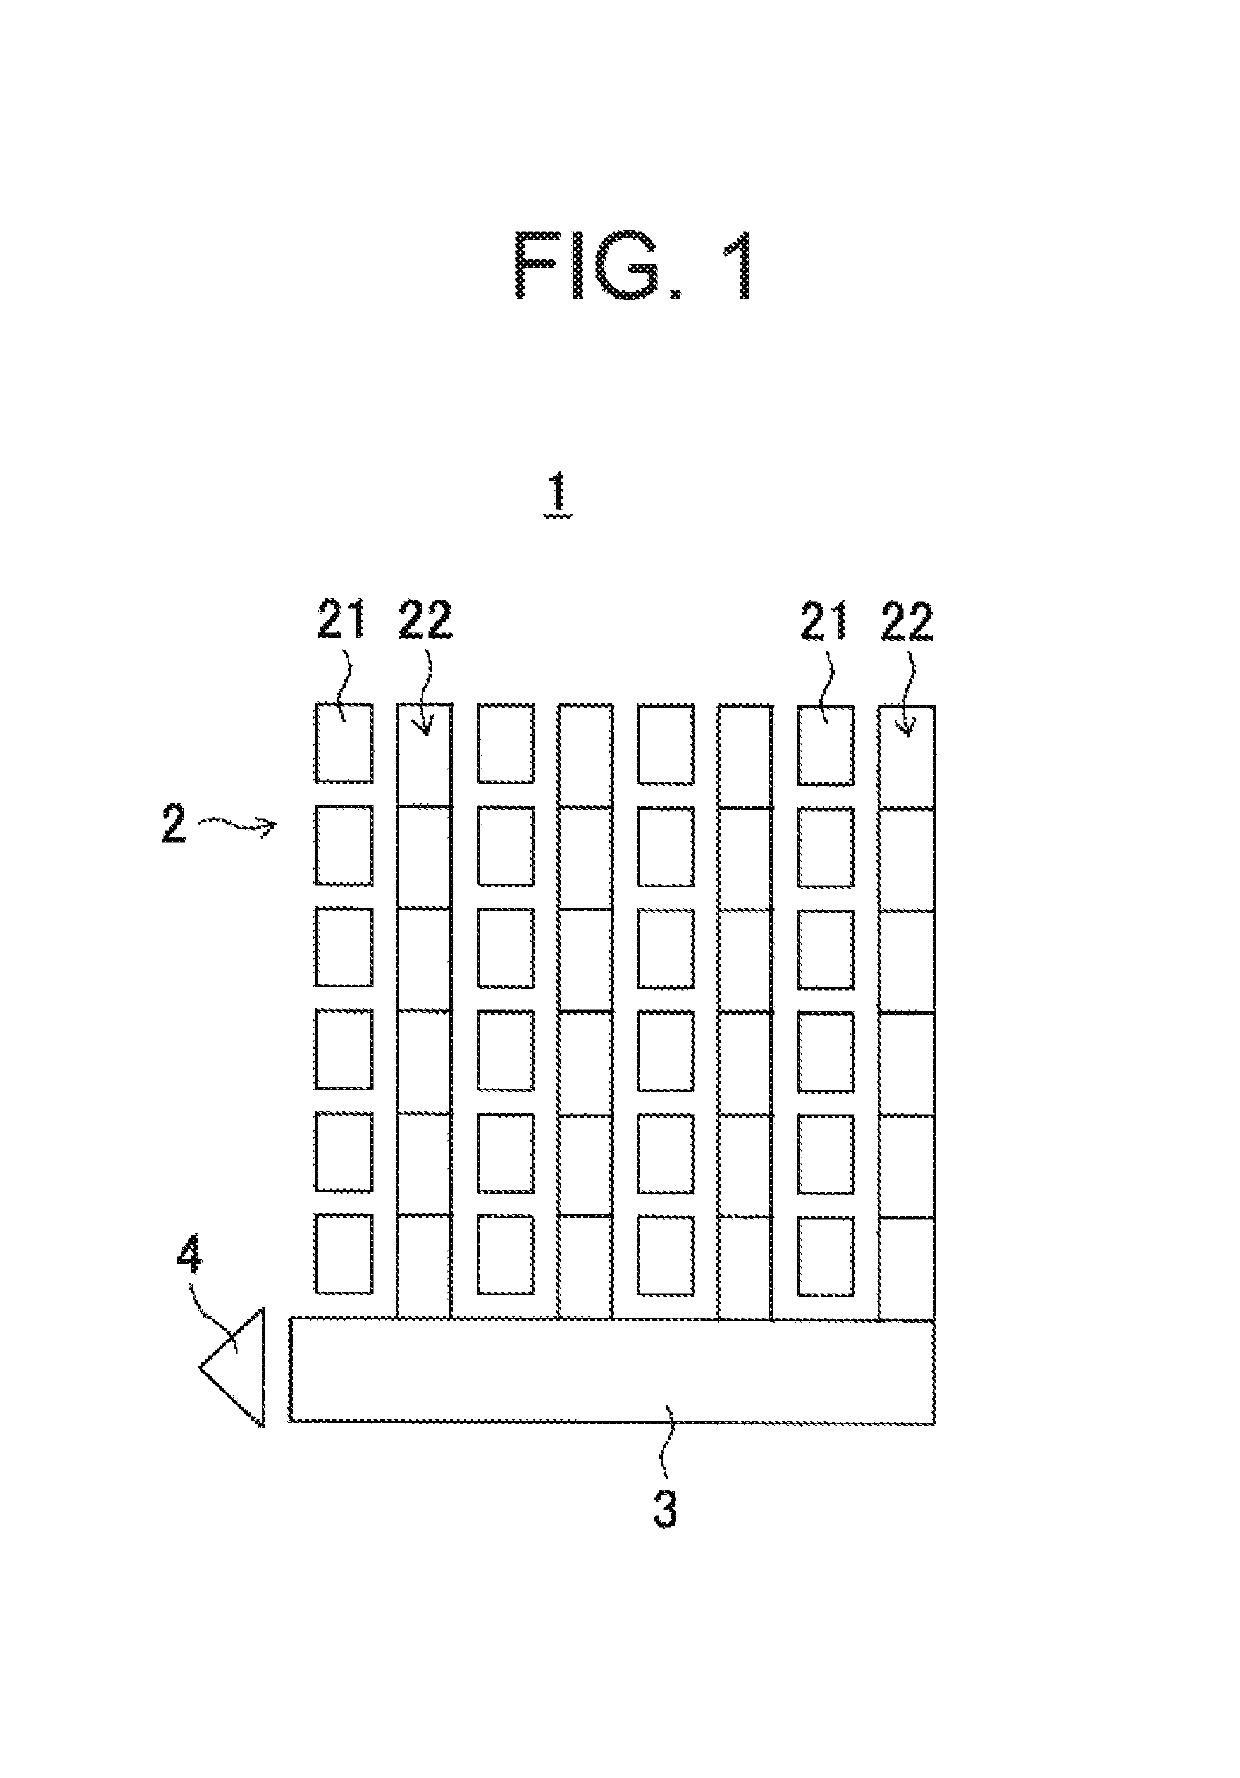 Solid-state imaging device, method for producing solid-state imaging device, and electronic apparatus using photoelectric conversion elements